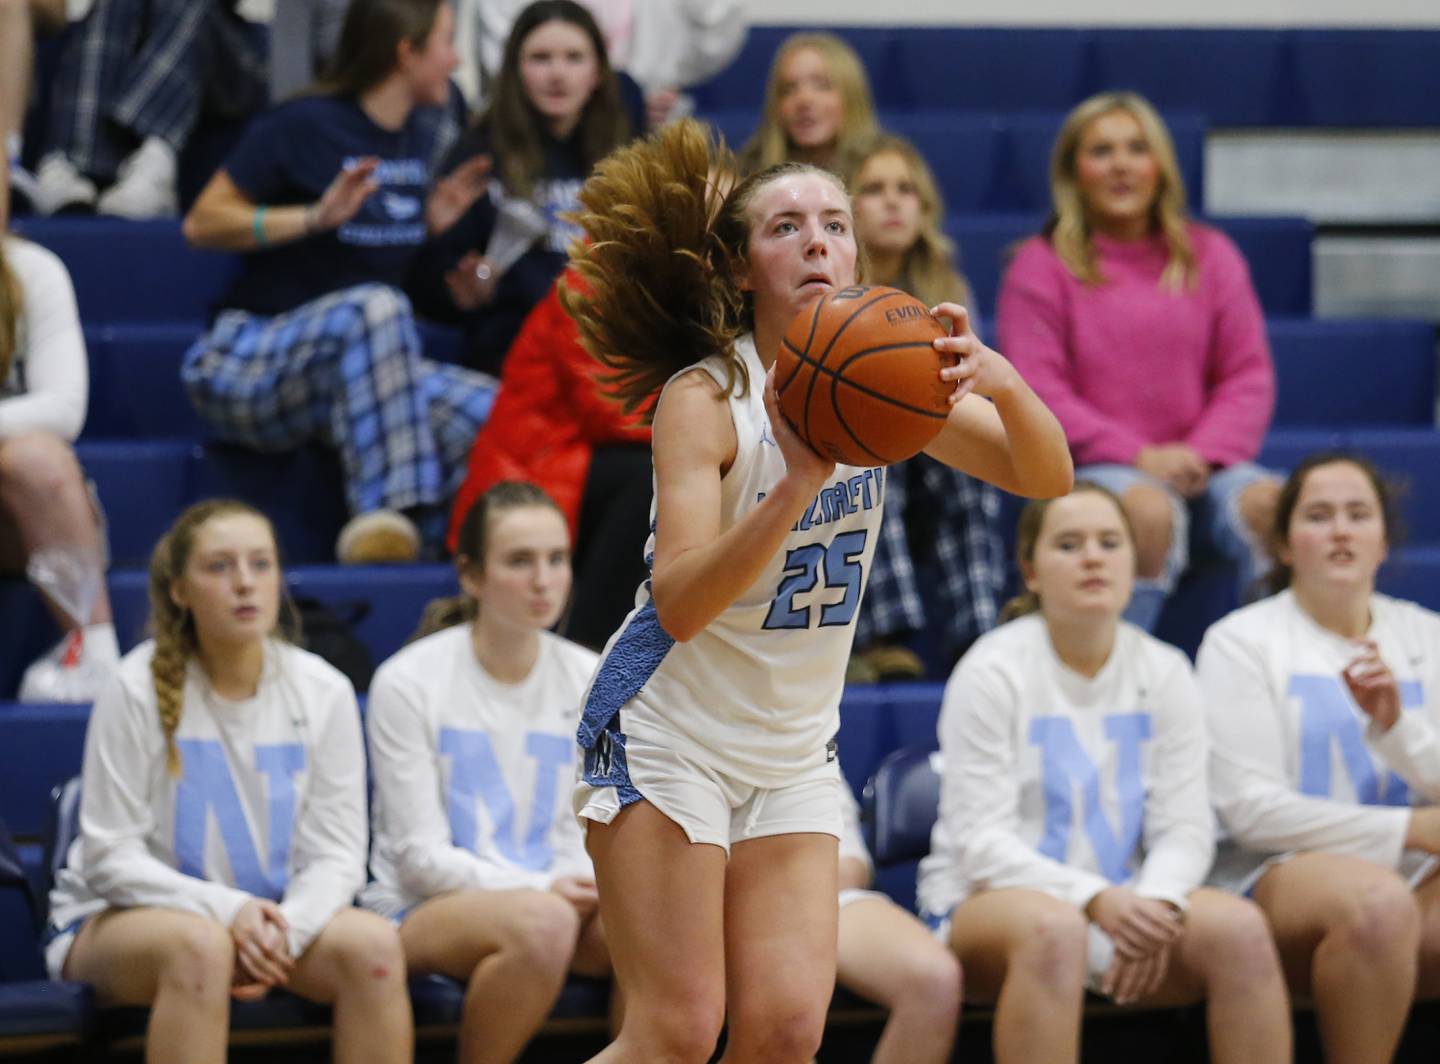 Nazareth's Amalia Dray (25) puts up a shot during the girls varsity basketball game between Carmel High School and Nazareth Academy on Wednesday, Dec. 7, 2022 in LaGrange, IL.